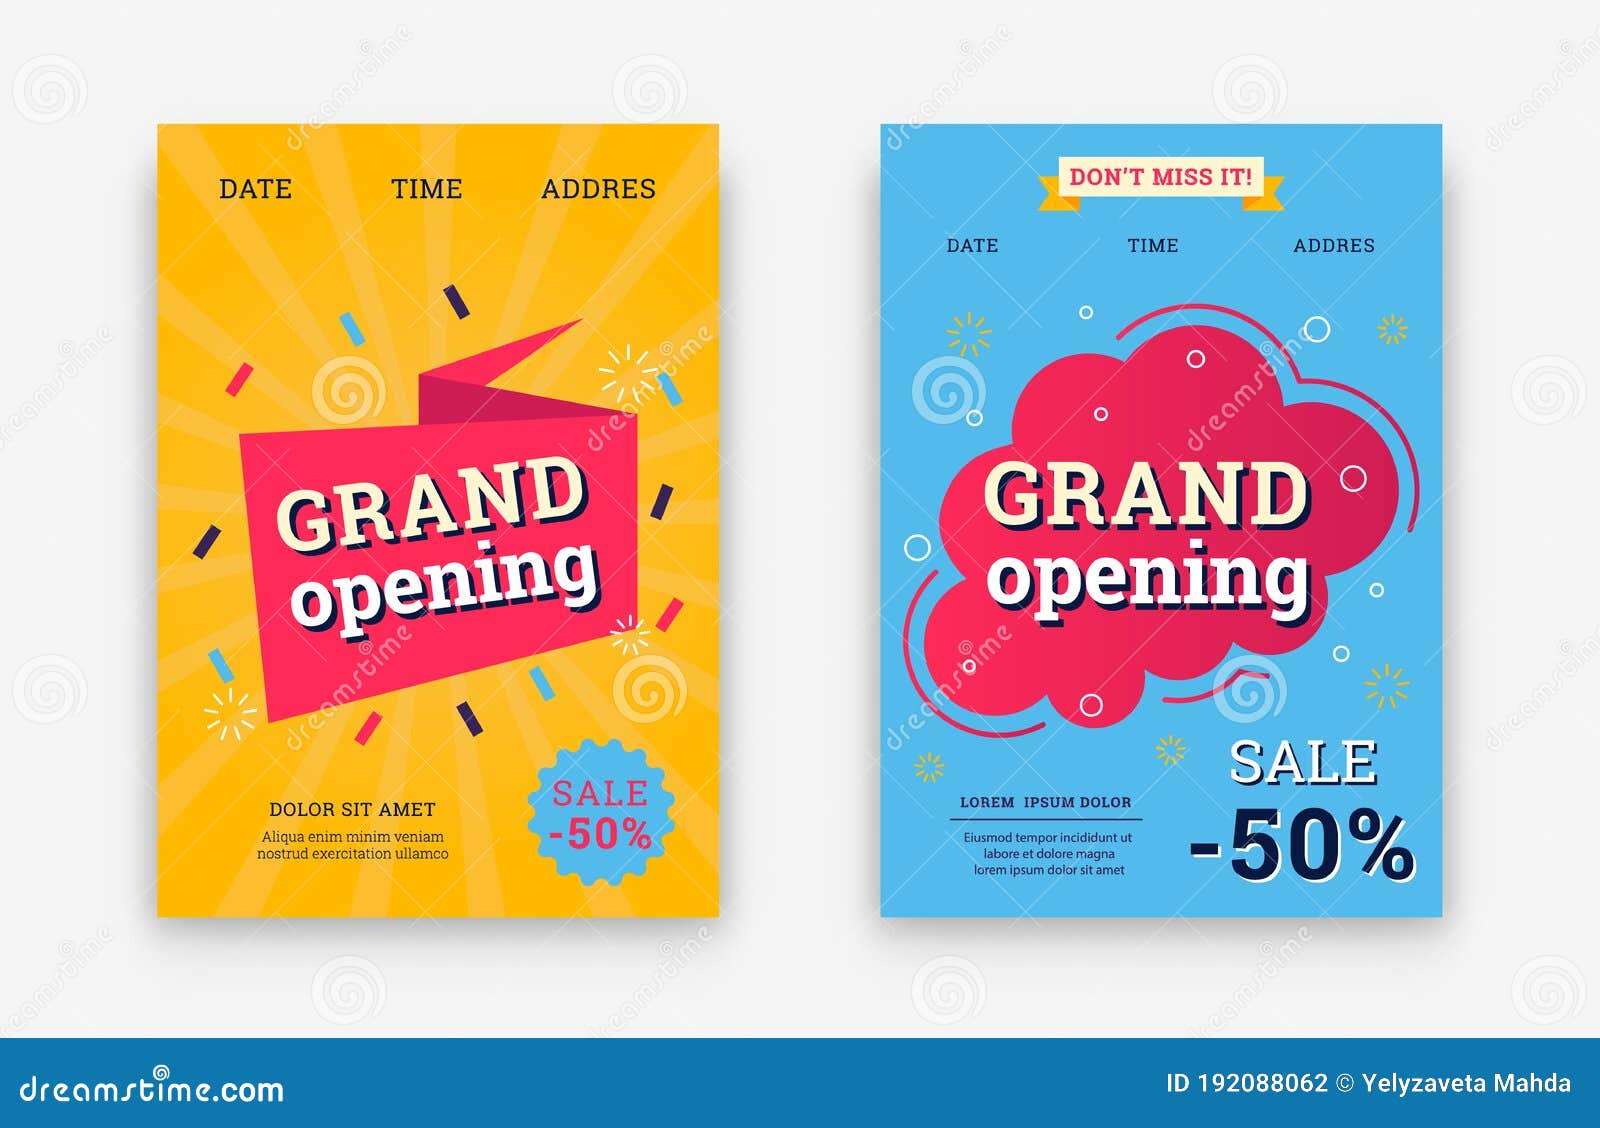 Grand Opening Invitation Posters. Set of Sale Banners with Text on Creative  Background Stock Vector - Illustration of grand, explosion: 192088062